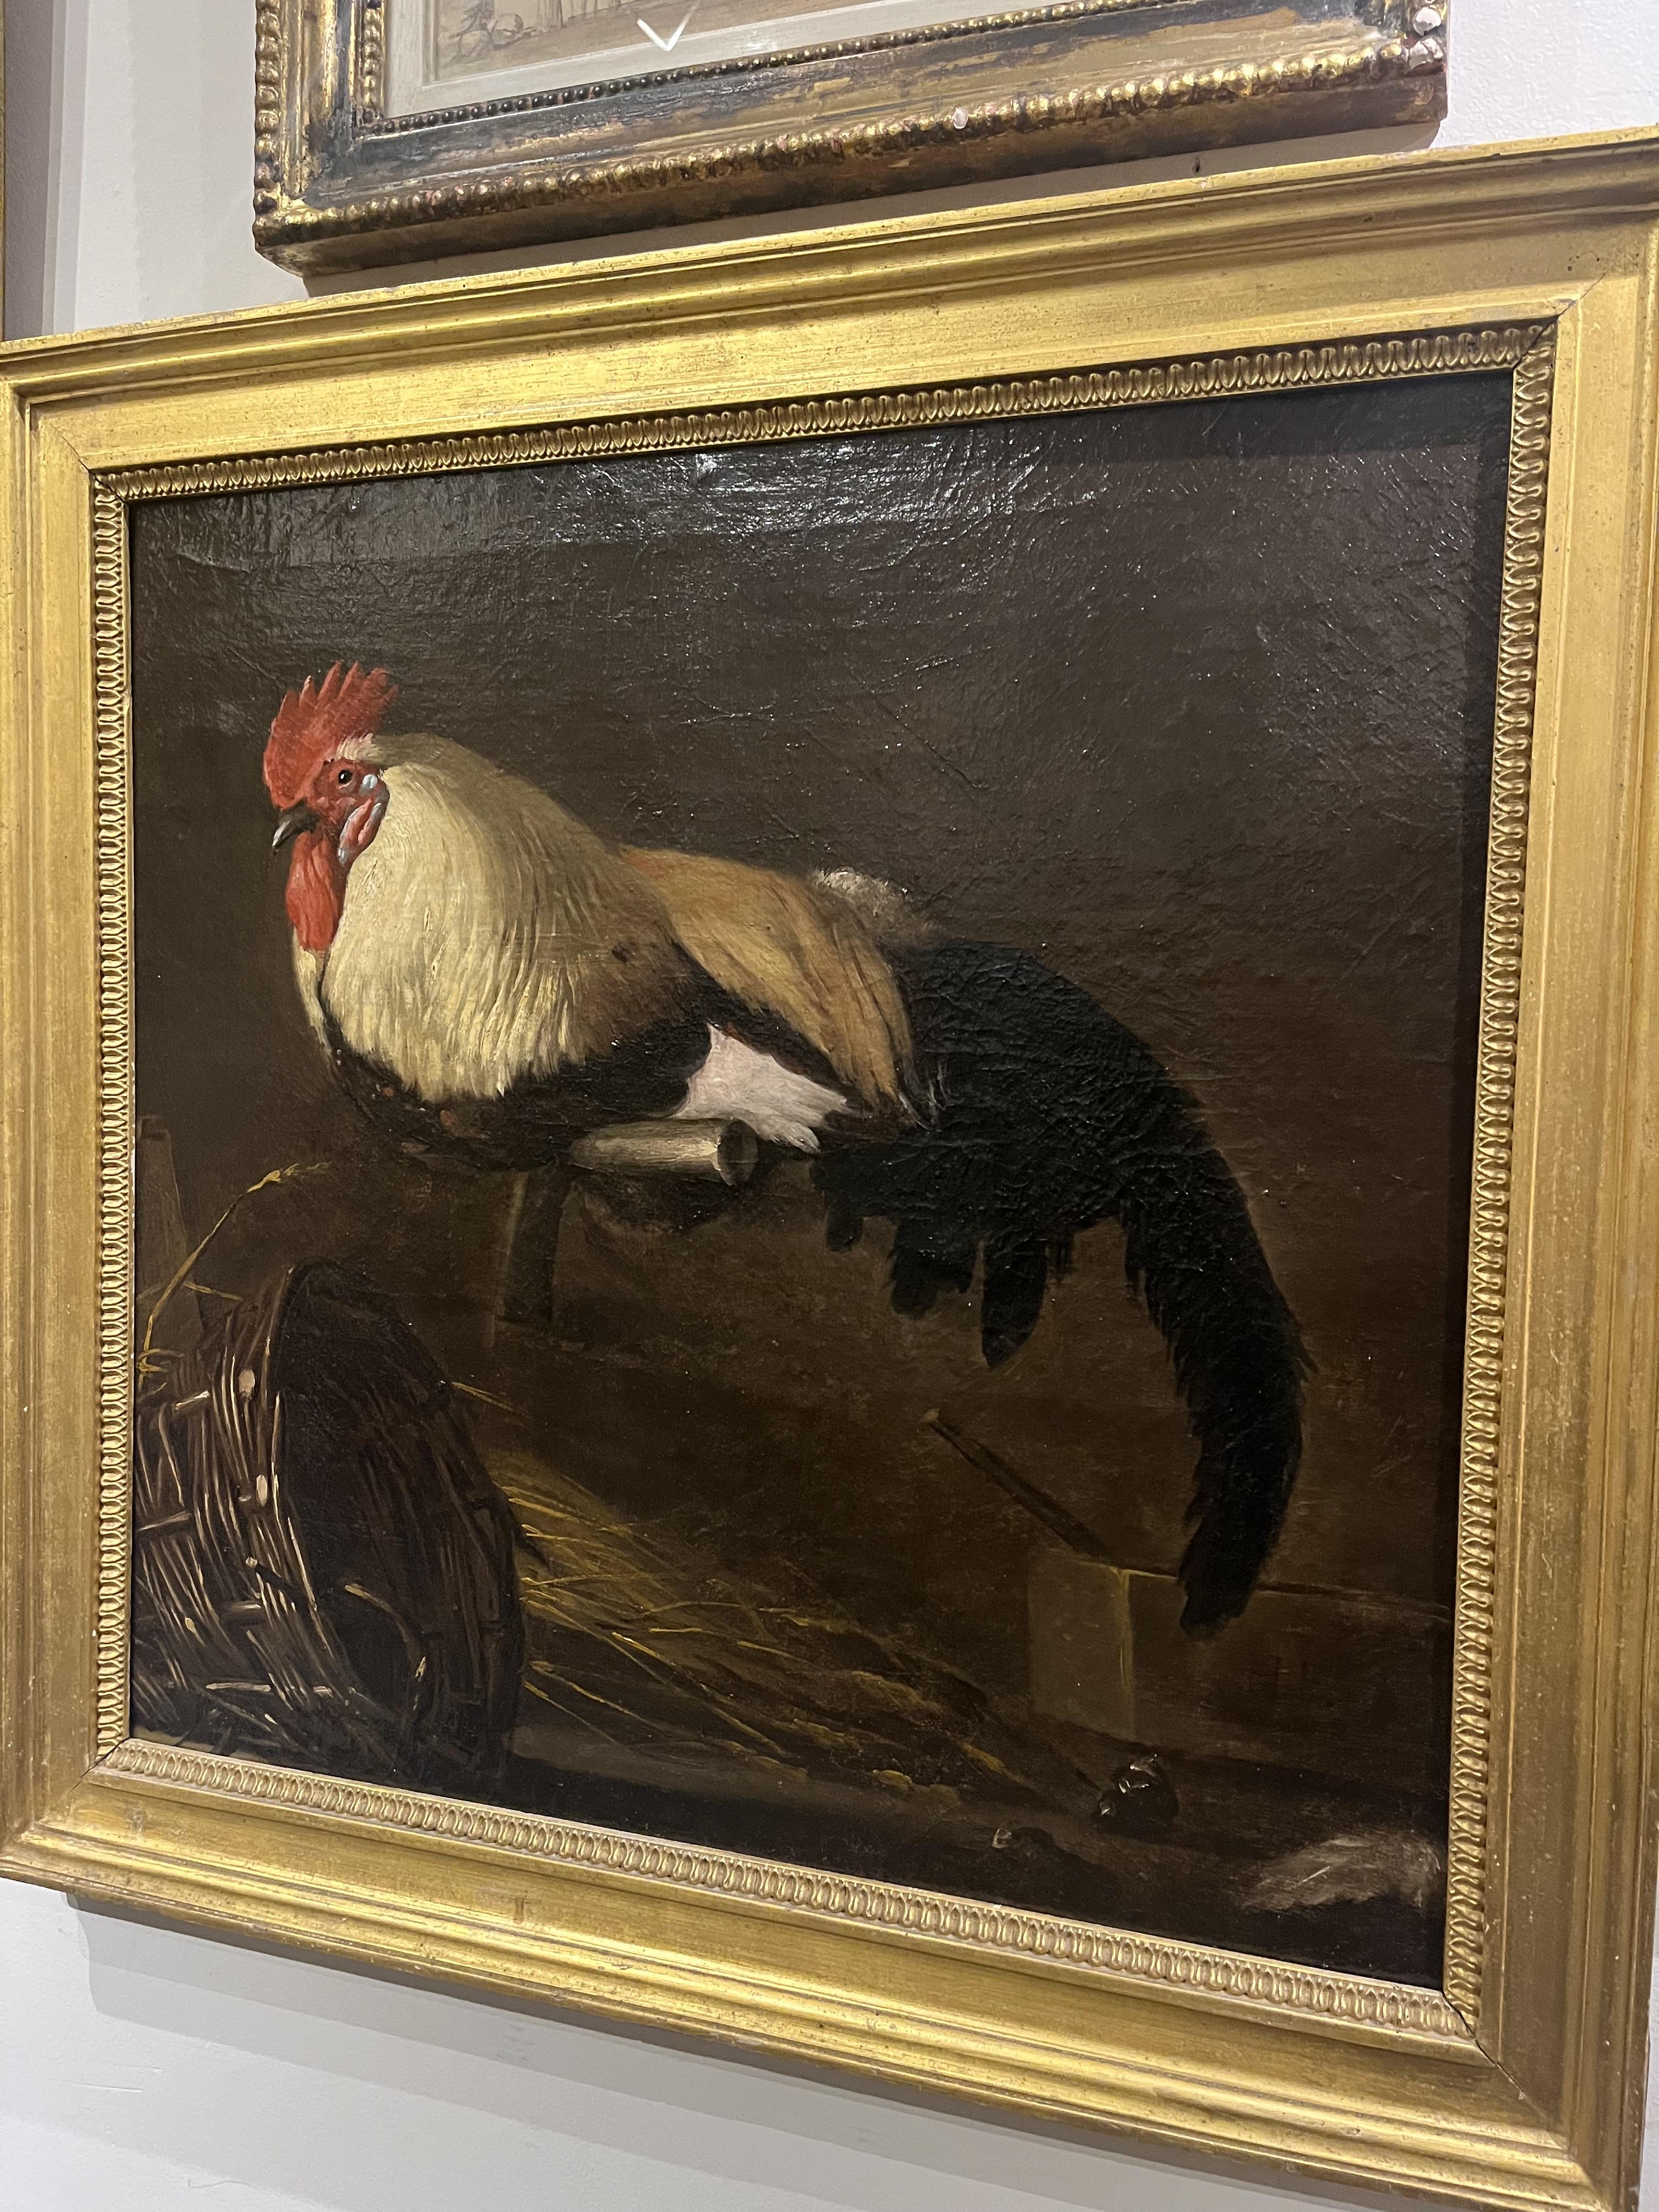 Italian, 18th Century, A Cockerel on a Perch in a Stable Interior - Image 4 of 4